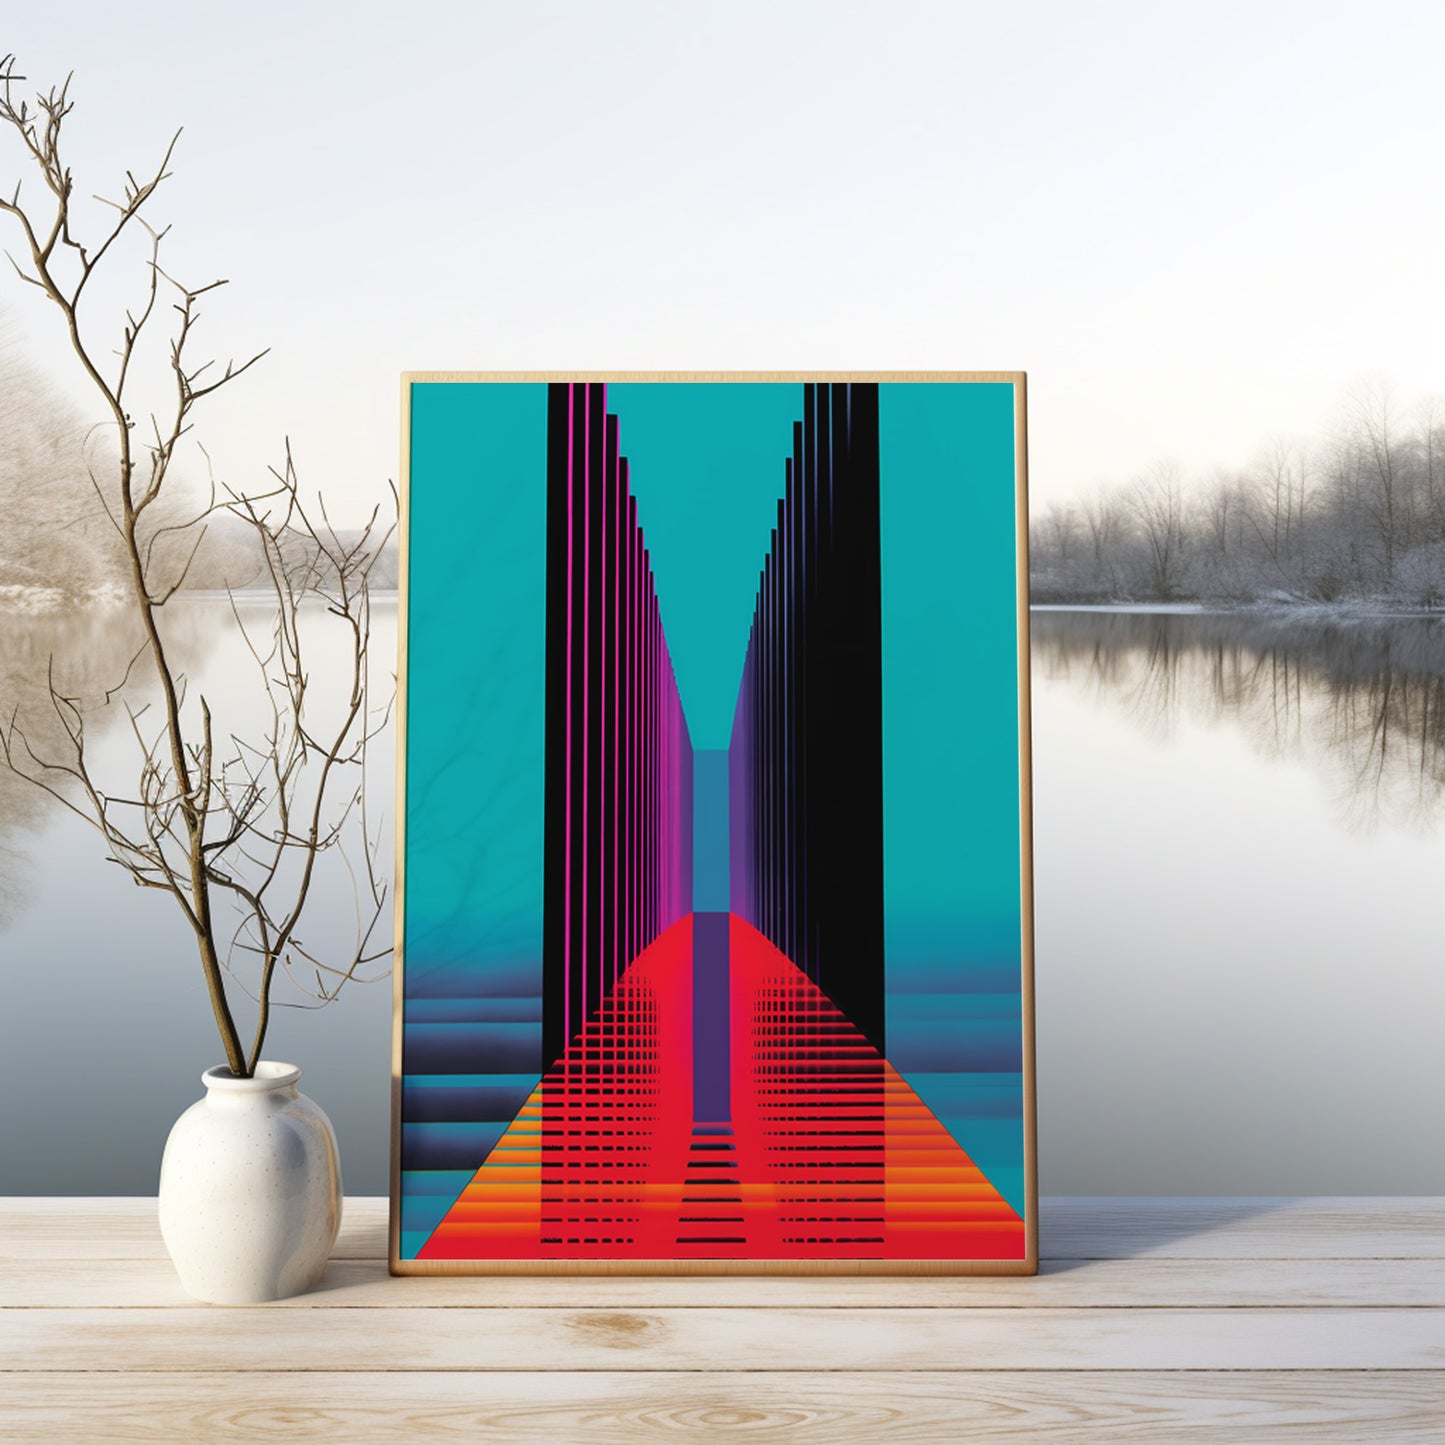 A modern abstract art piece in vibrant colors displayed in a frame beside a vase with branches on a reflective surface.